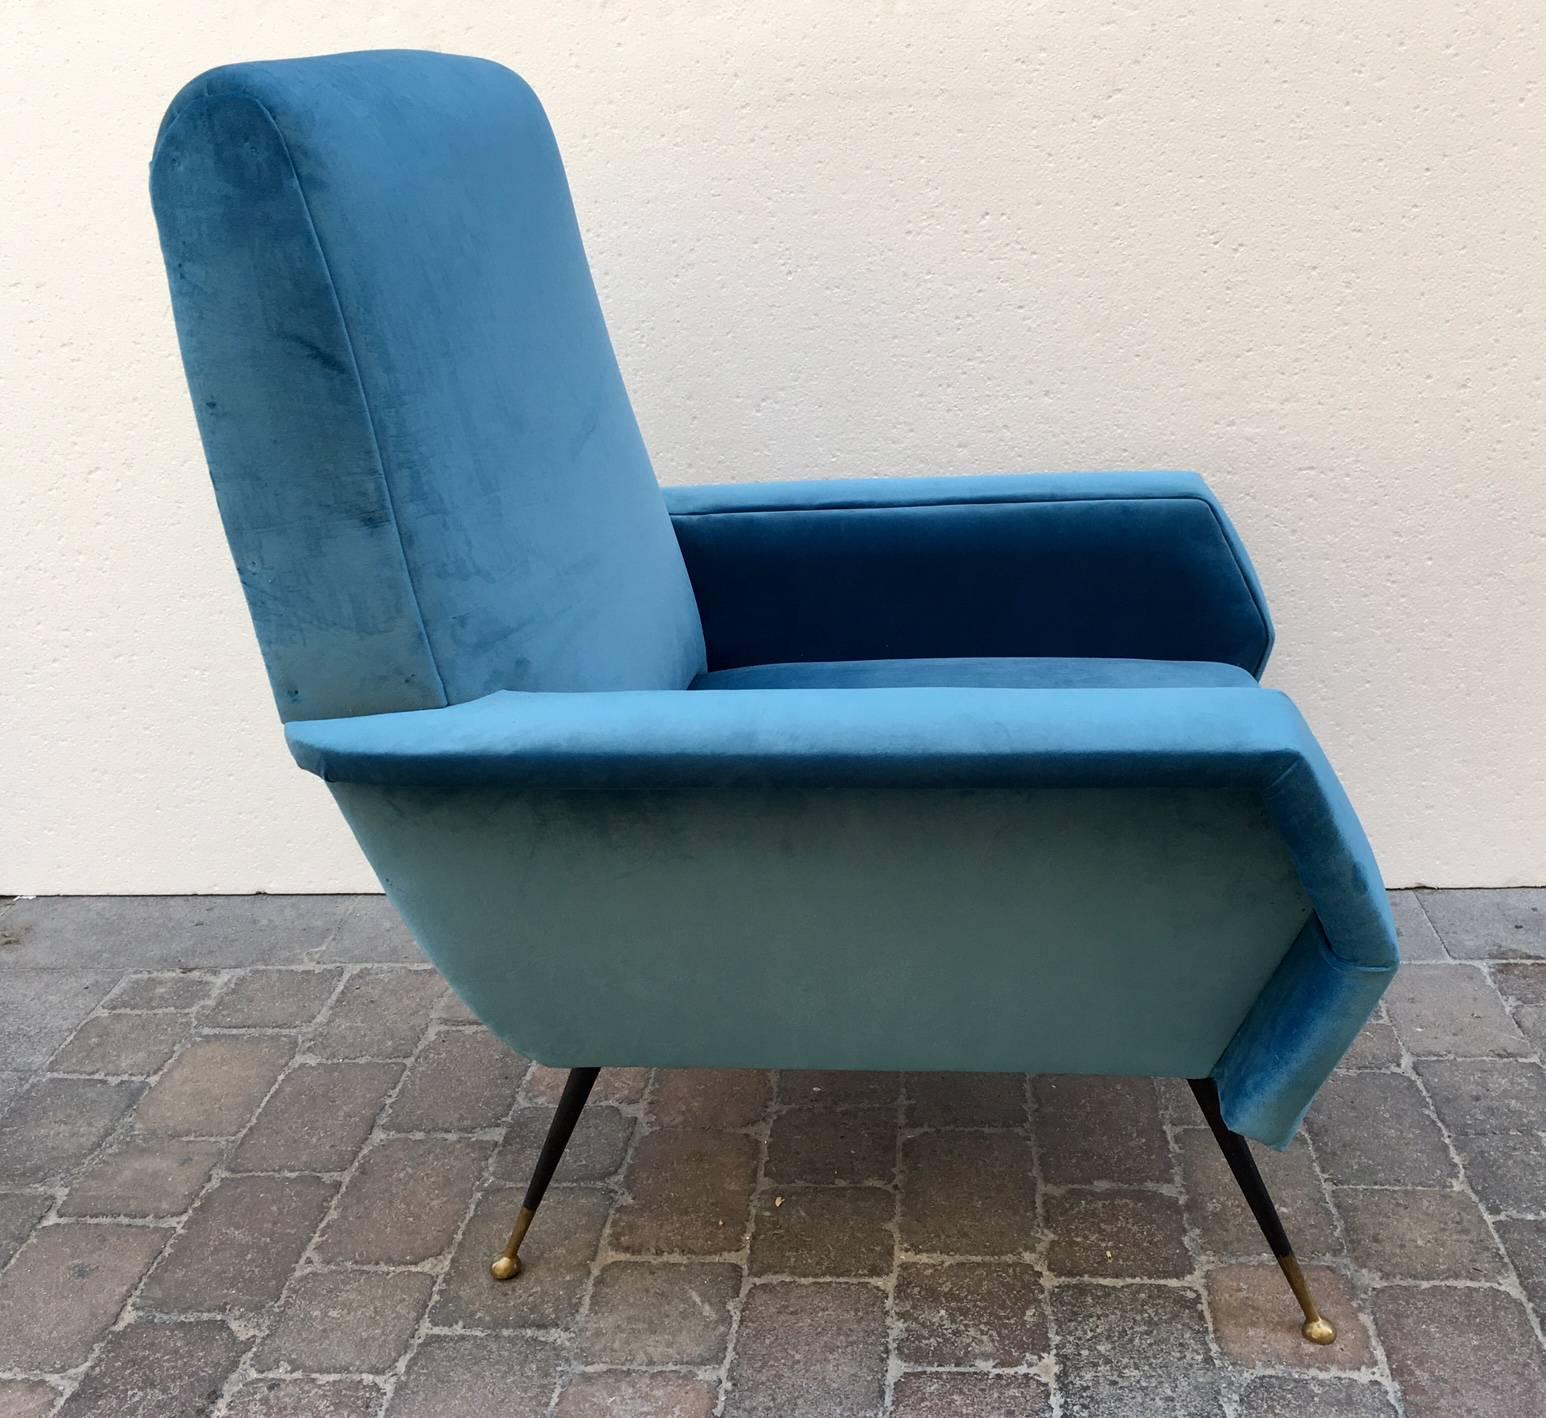 Armchair with solid wood structure and metalic legs lacquered black, finished in brass, upholstered in blue velvet.The upholstery on the armrests and upper part has worn